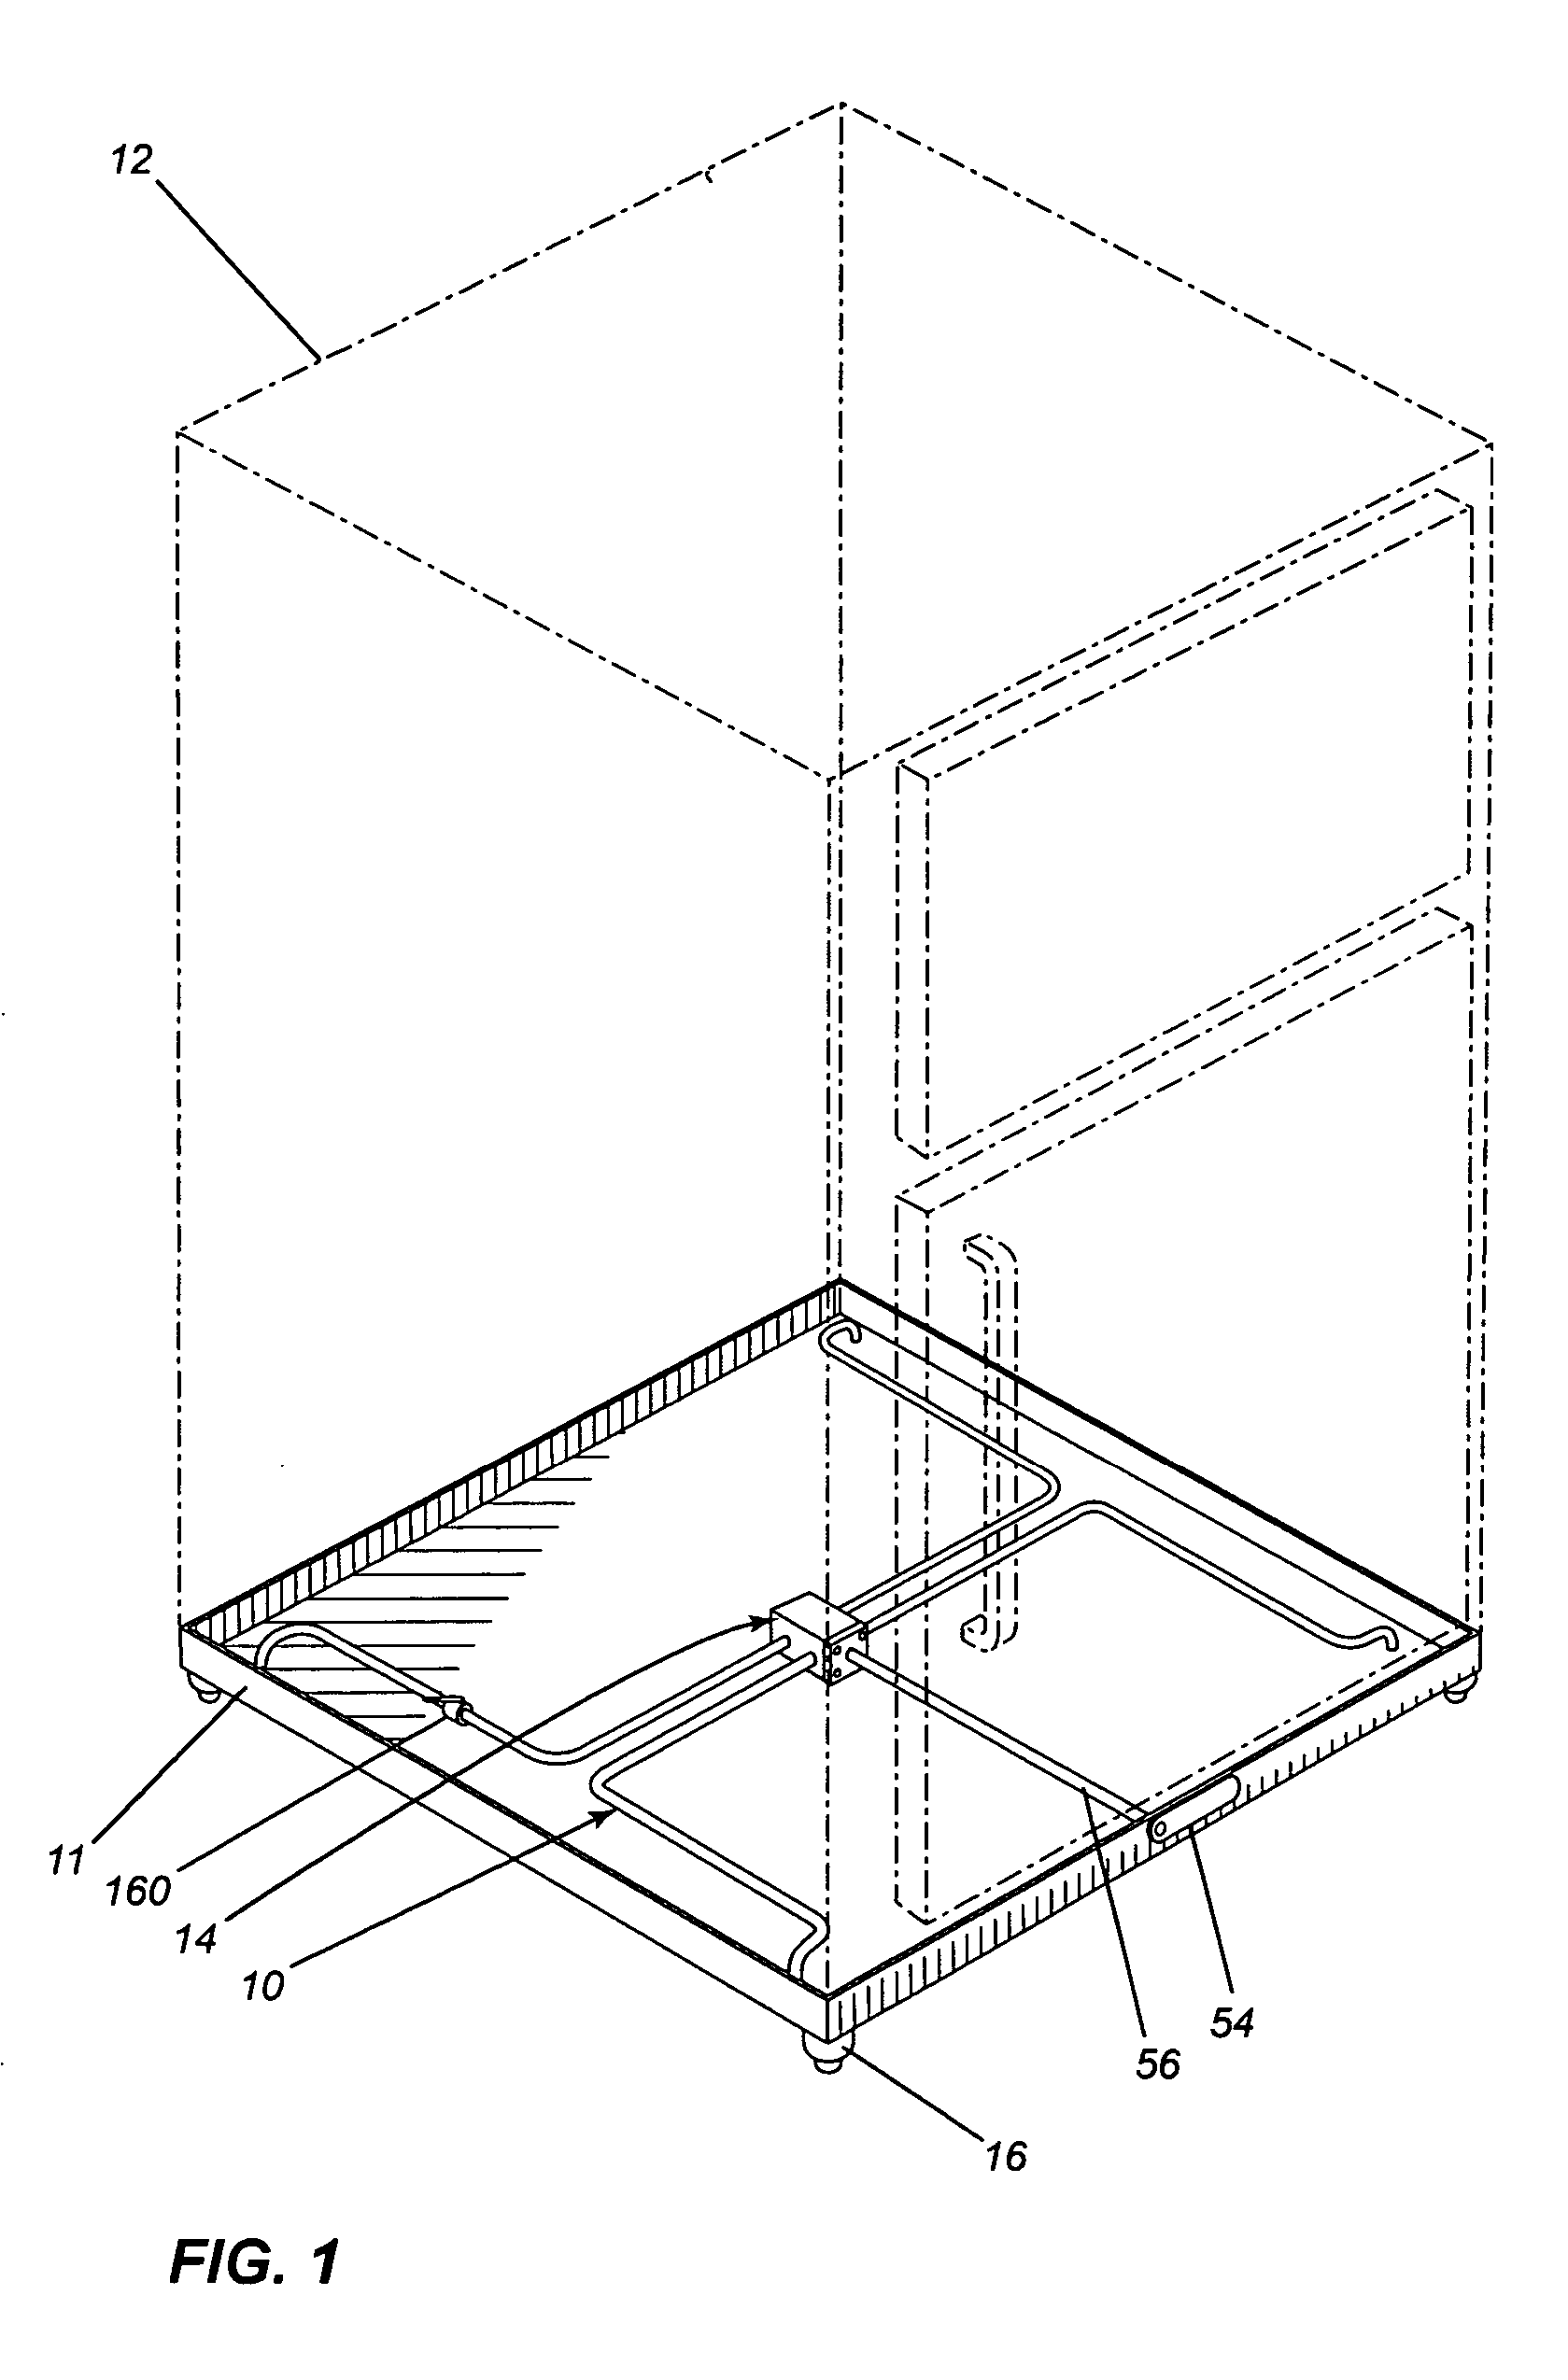 Device for adjusting the attitude of an object